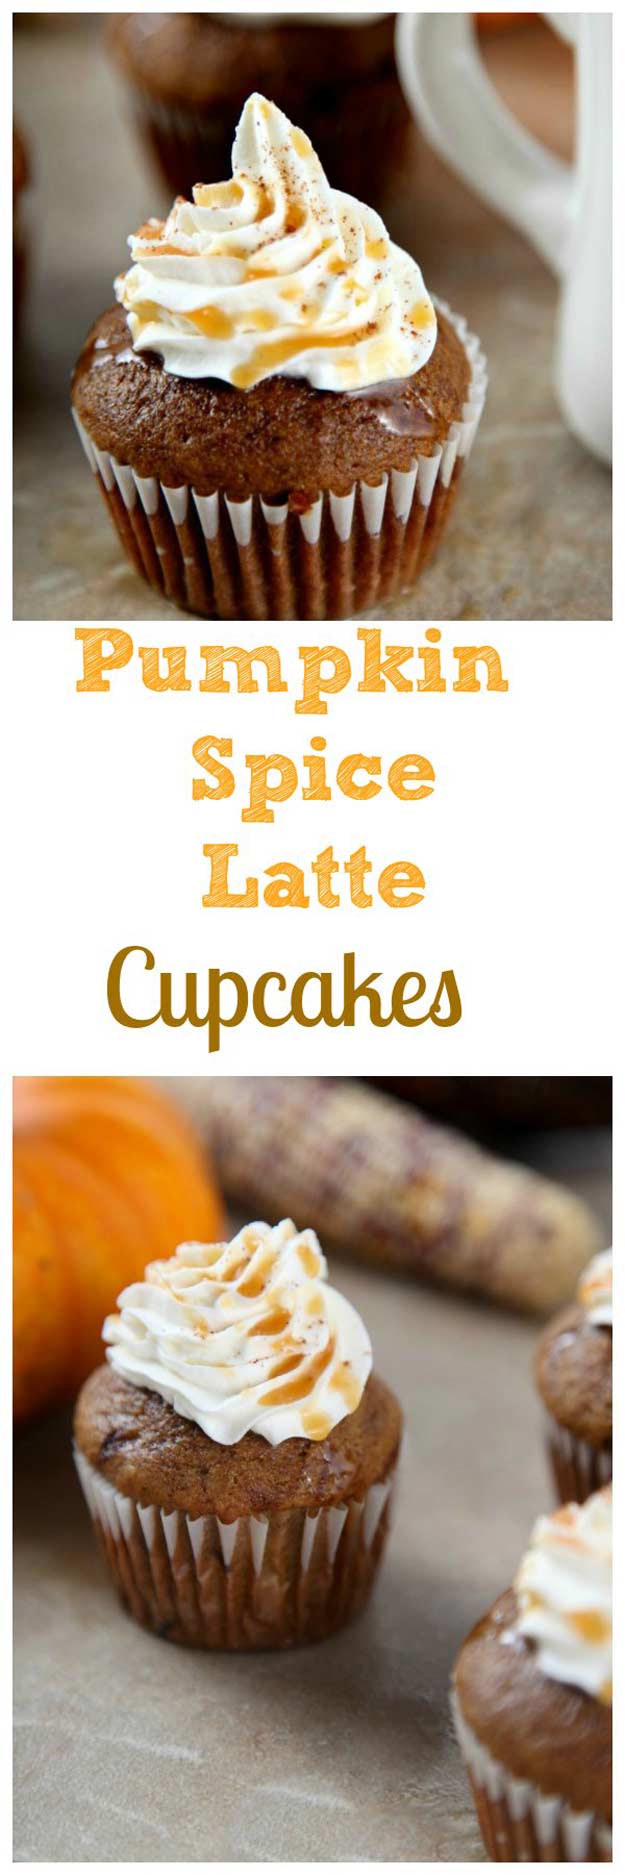 Pumpkin Spice Latte Recipes DIY Projects Craft Ideas & How To’s for ...